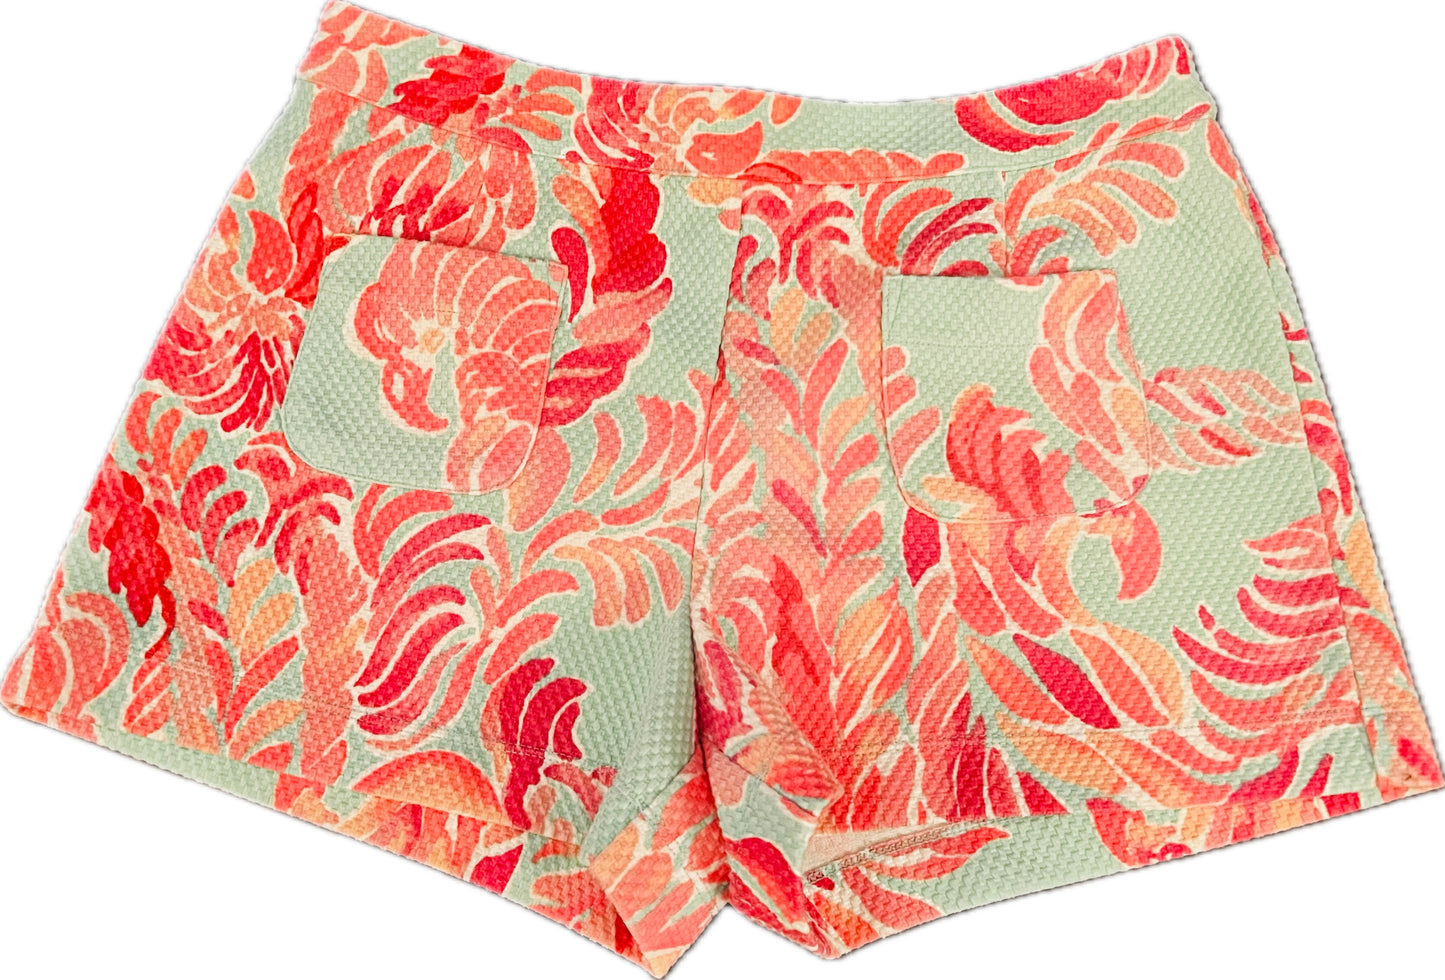 Lilly Pulitzer Shorts Size 8 $7